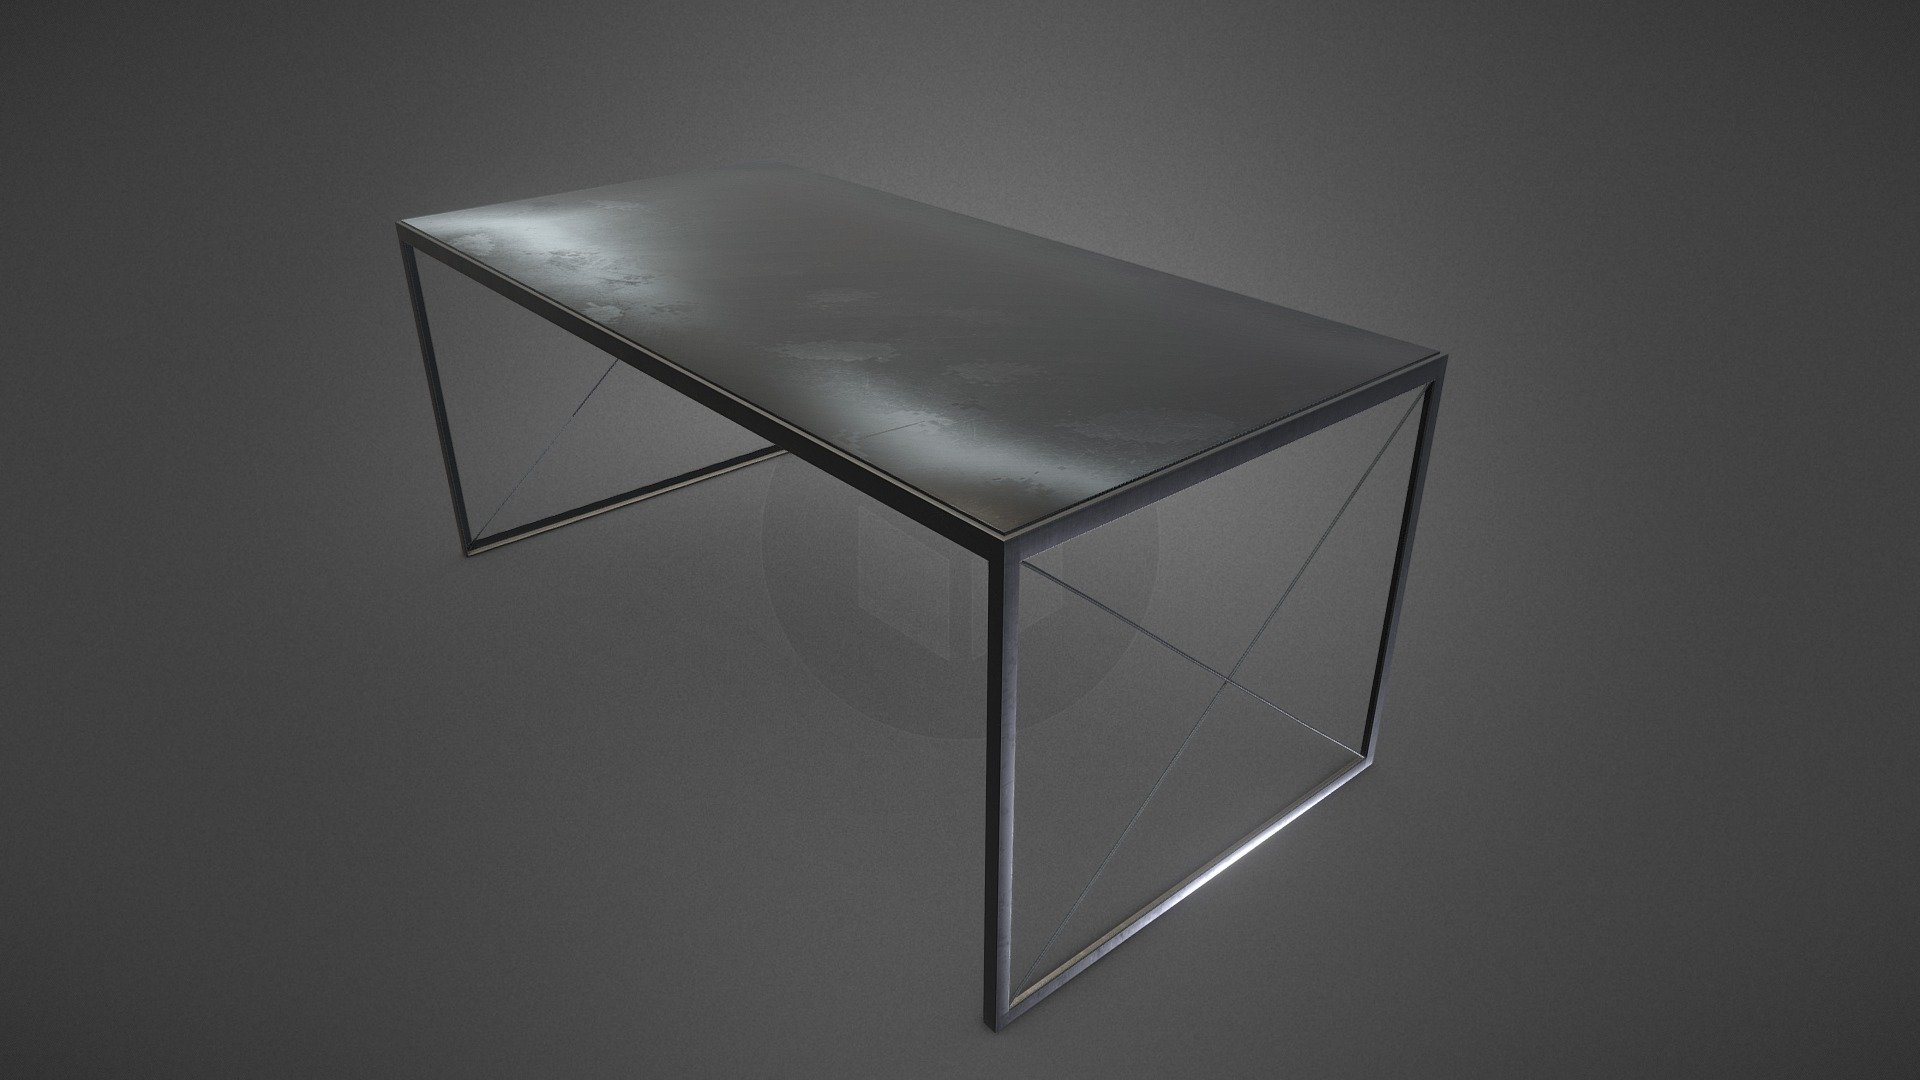 3D model of a Metal Table.

3D Models:

Formats included : .FBX .OBJ

Textures:

Created with Substance Painter.

1*4K 8-bit PNG format.

PBR Metal/Roughness standard 3d model